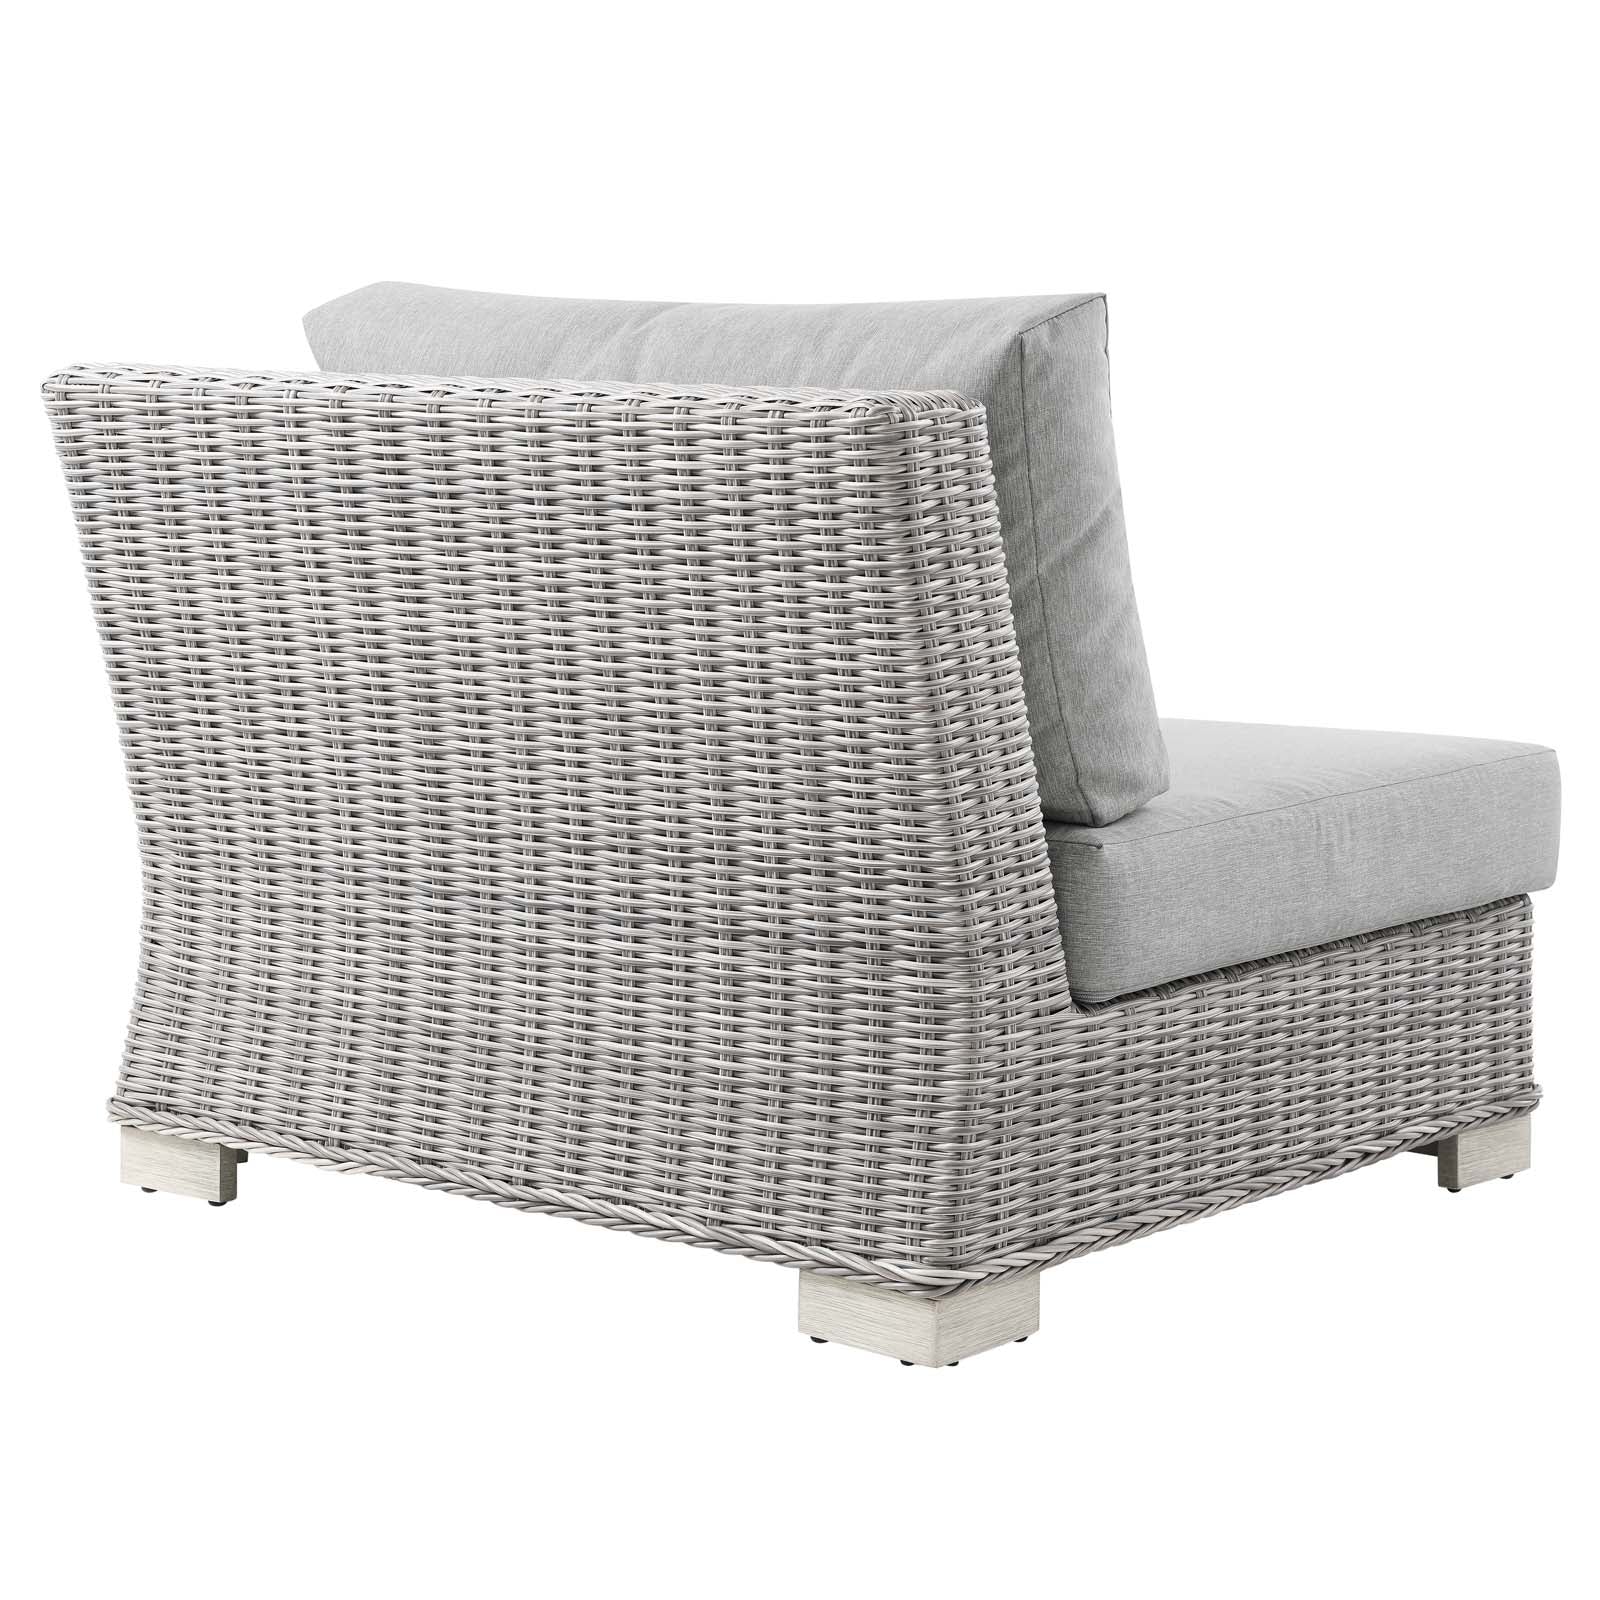 Modway Outdoor Chairs - Conway Outdoor Patio Wicker Rattan Right-Arm Chair Light Gray